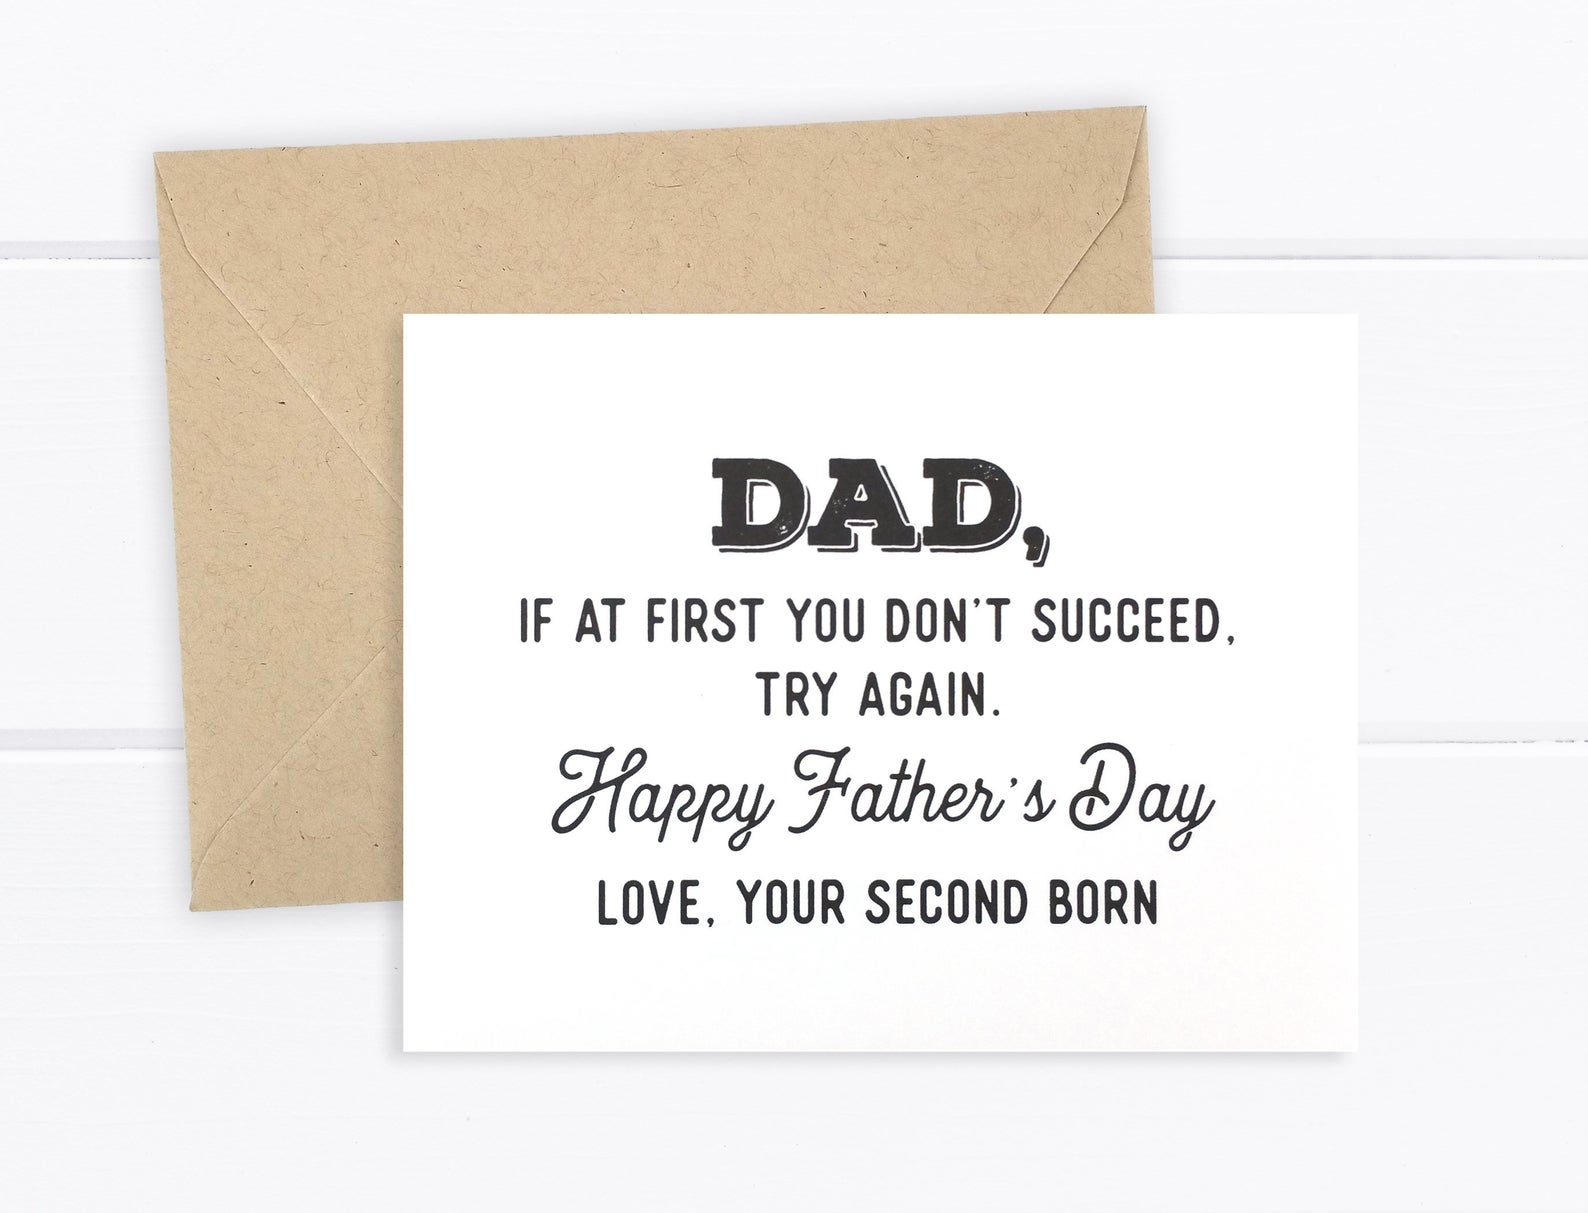 Funny Father's Day cards | Second Born Card by Firefly Paper Studio 